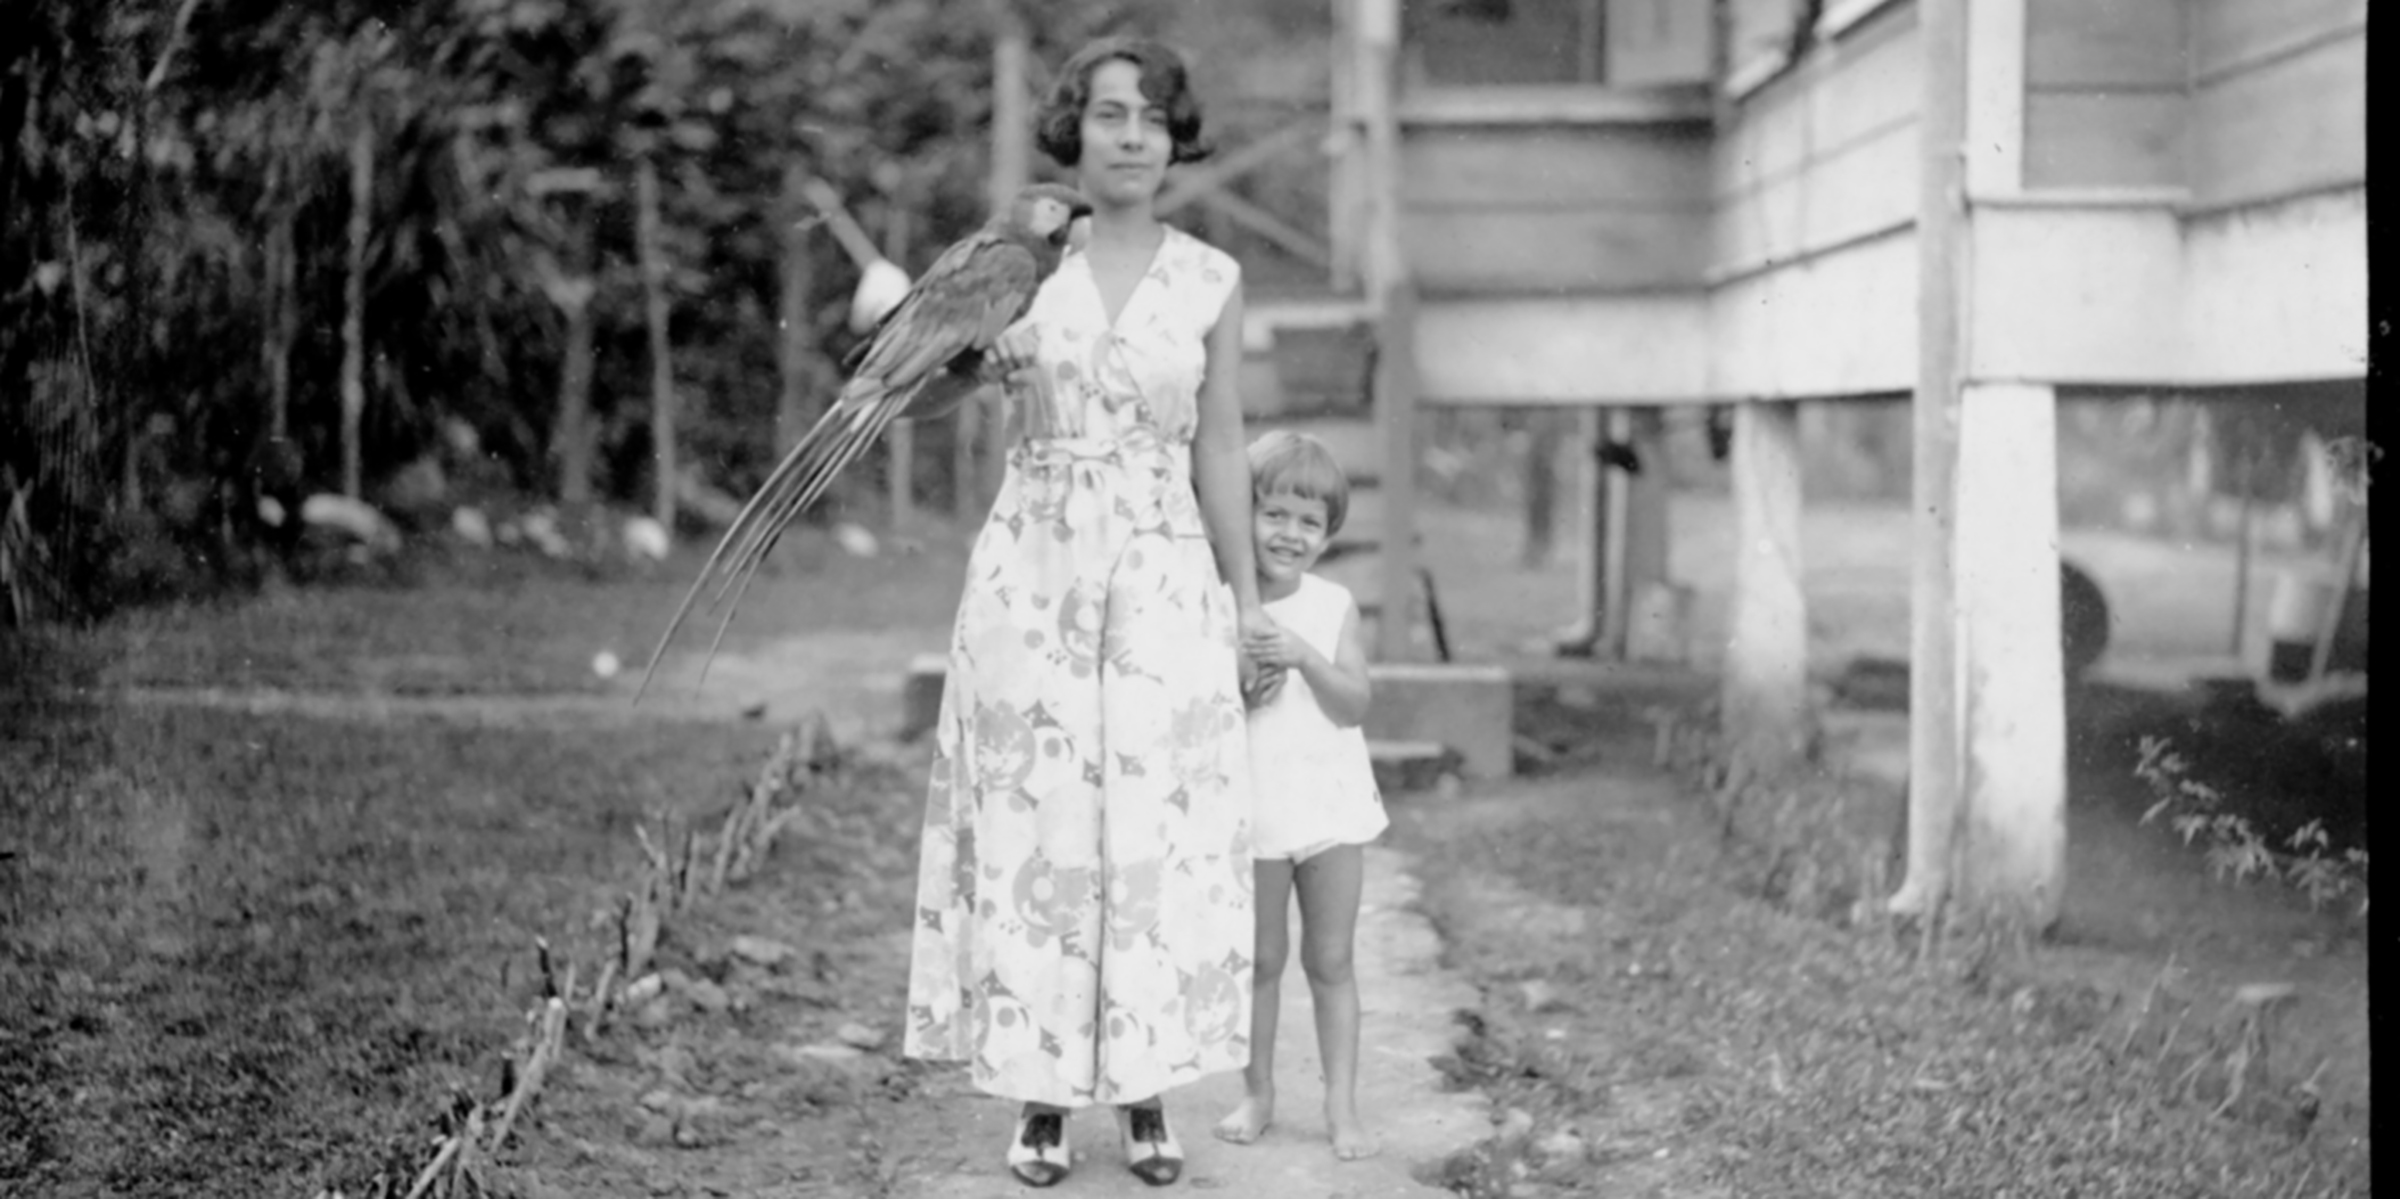 Black and white photograph of a woman in a floral dress with a large bird on her hand, and a small child smiling and standing at her side